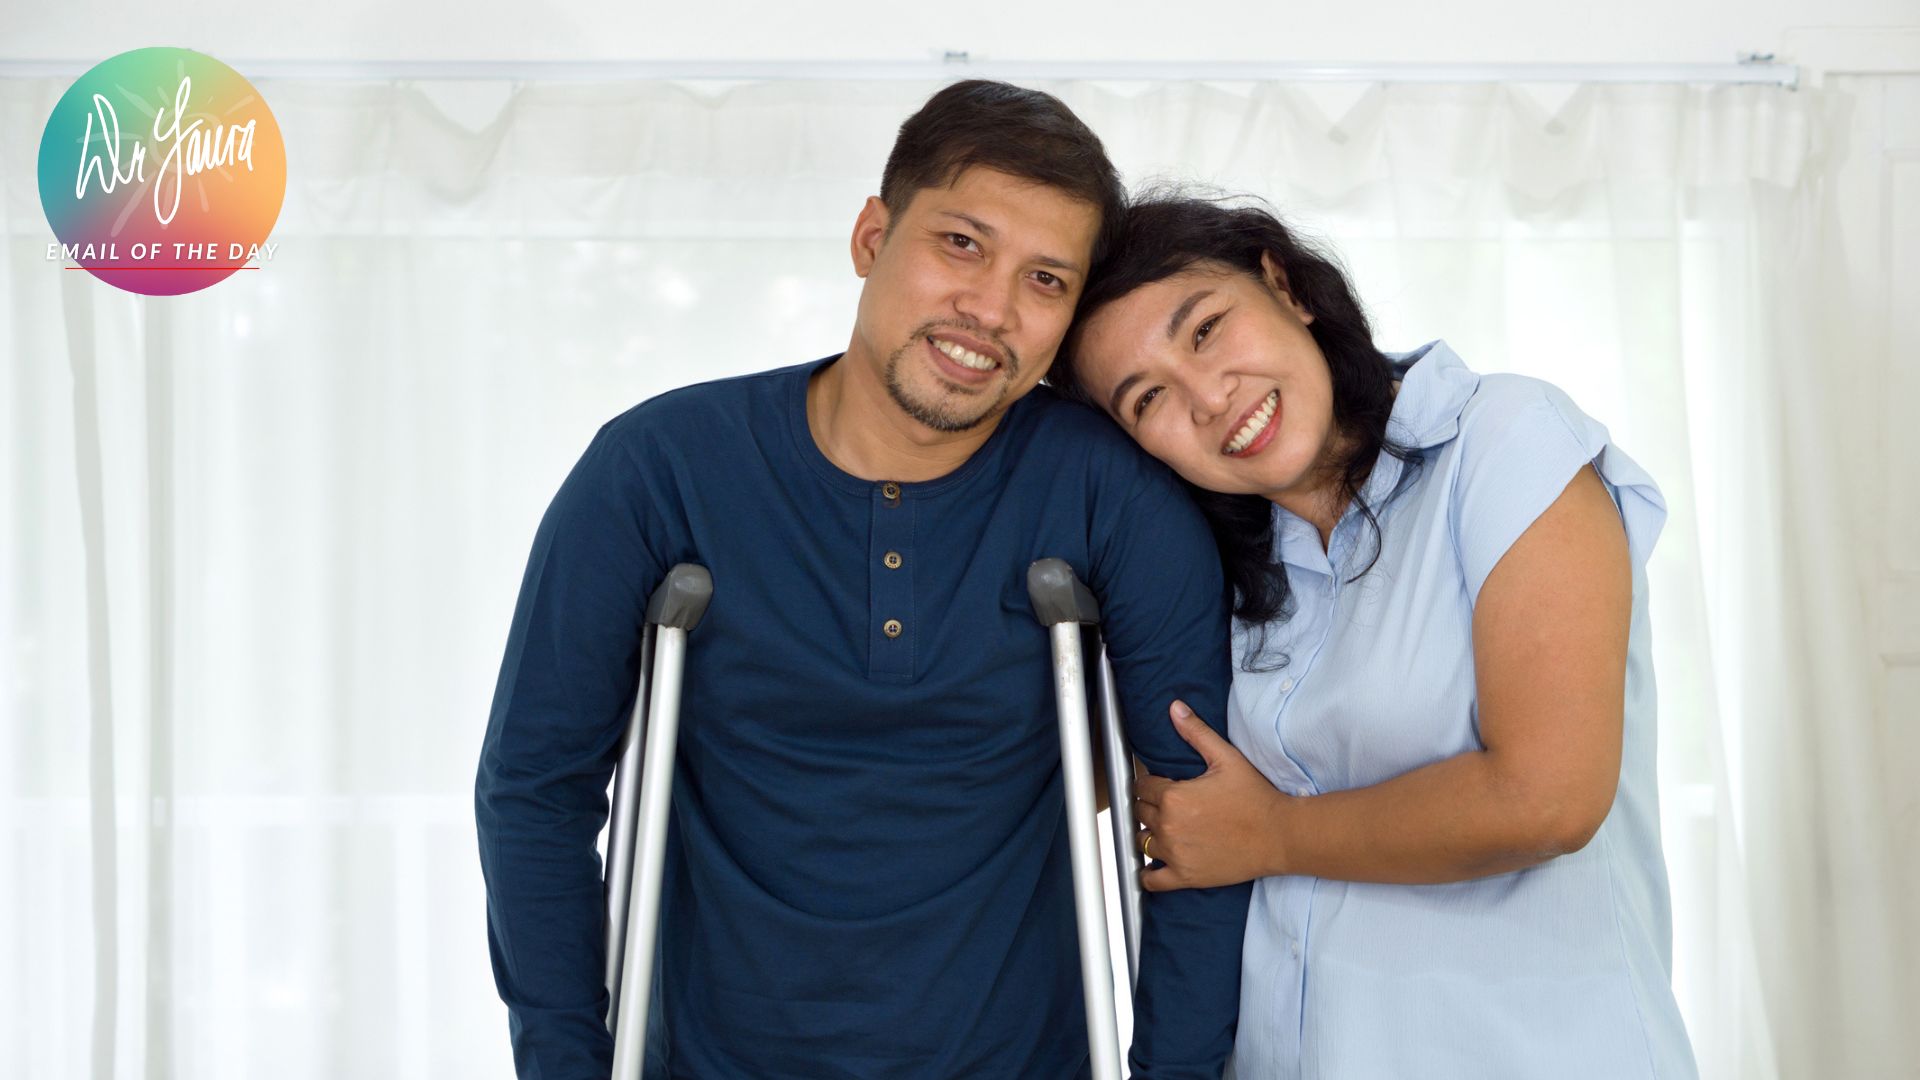 Smiling man stands on crutches while smiling woman holds onto one of his arms and leans head on his shoulder